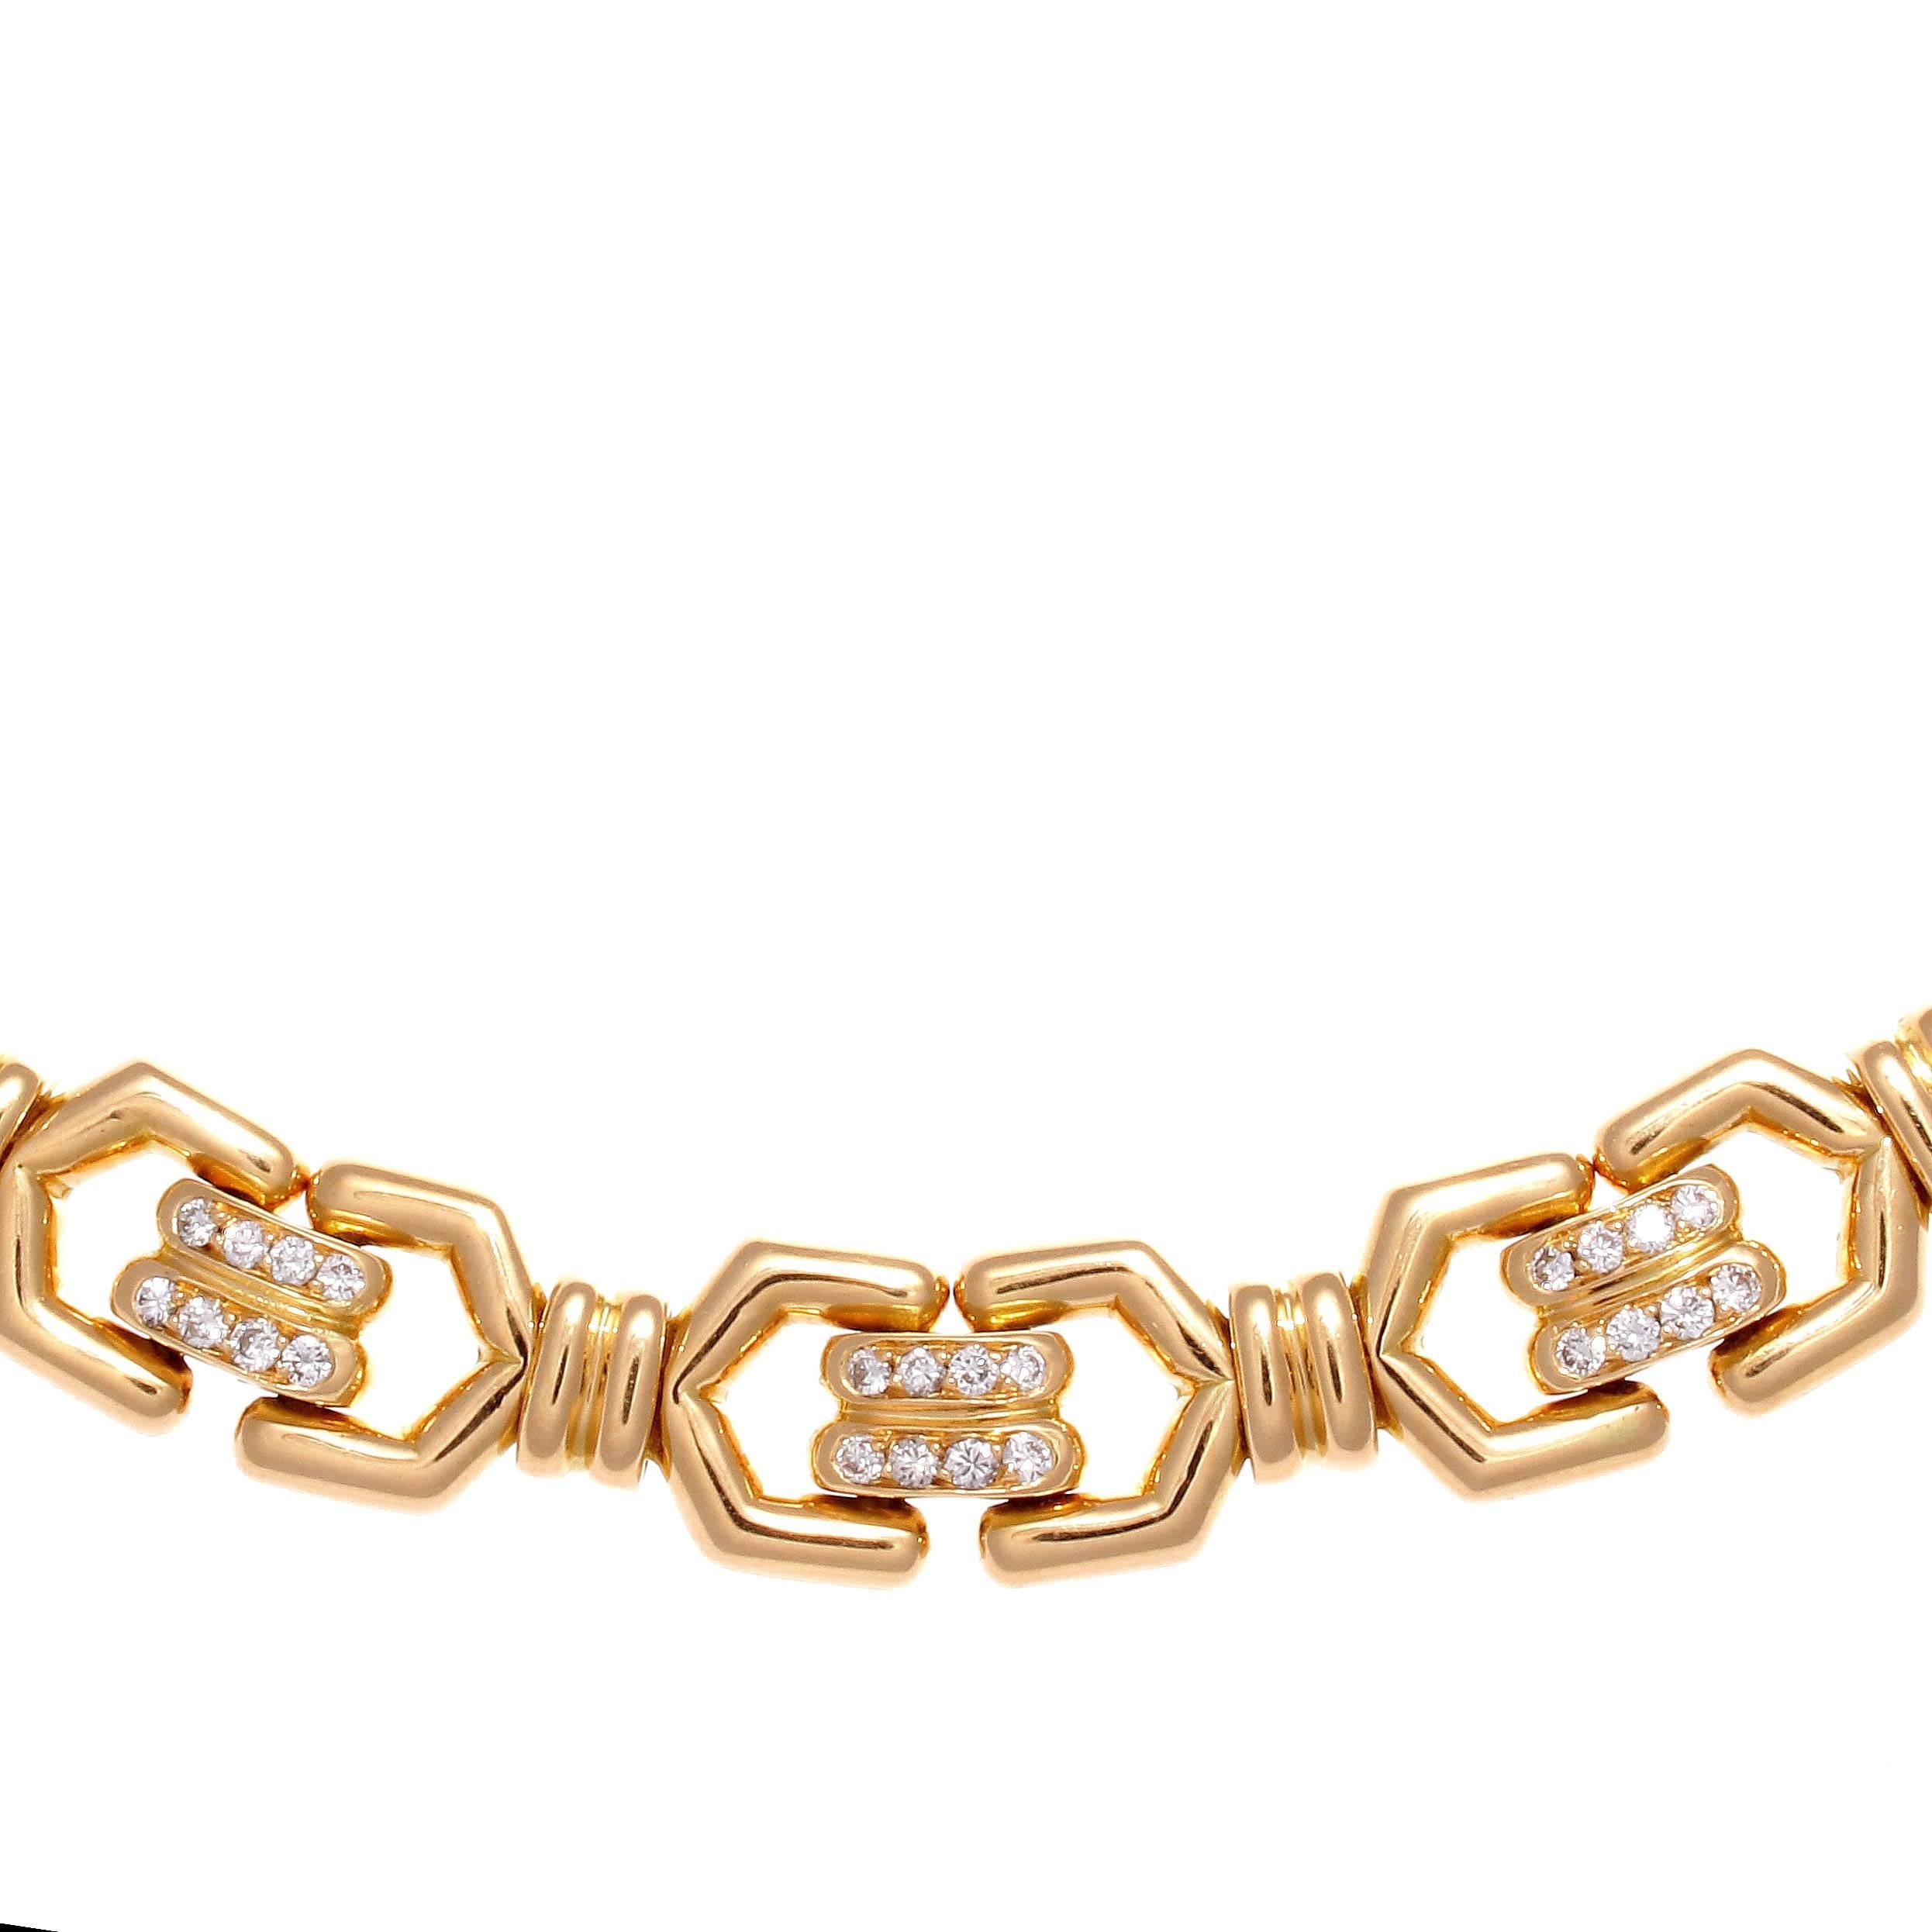 An alluring design of classic style from the French designers at Mauboussin. Designed with beautiful links of glistening 18k gold are hinged together by numerous white, clean diamonds. Signed Mauboussin, numbered and stamped with French